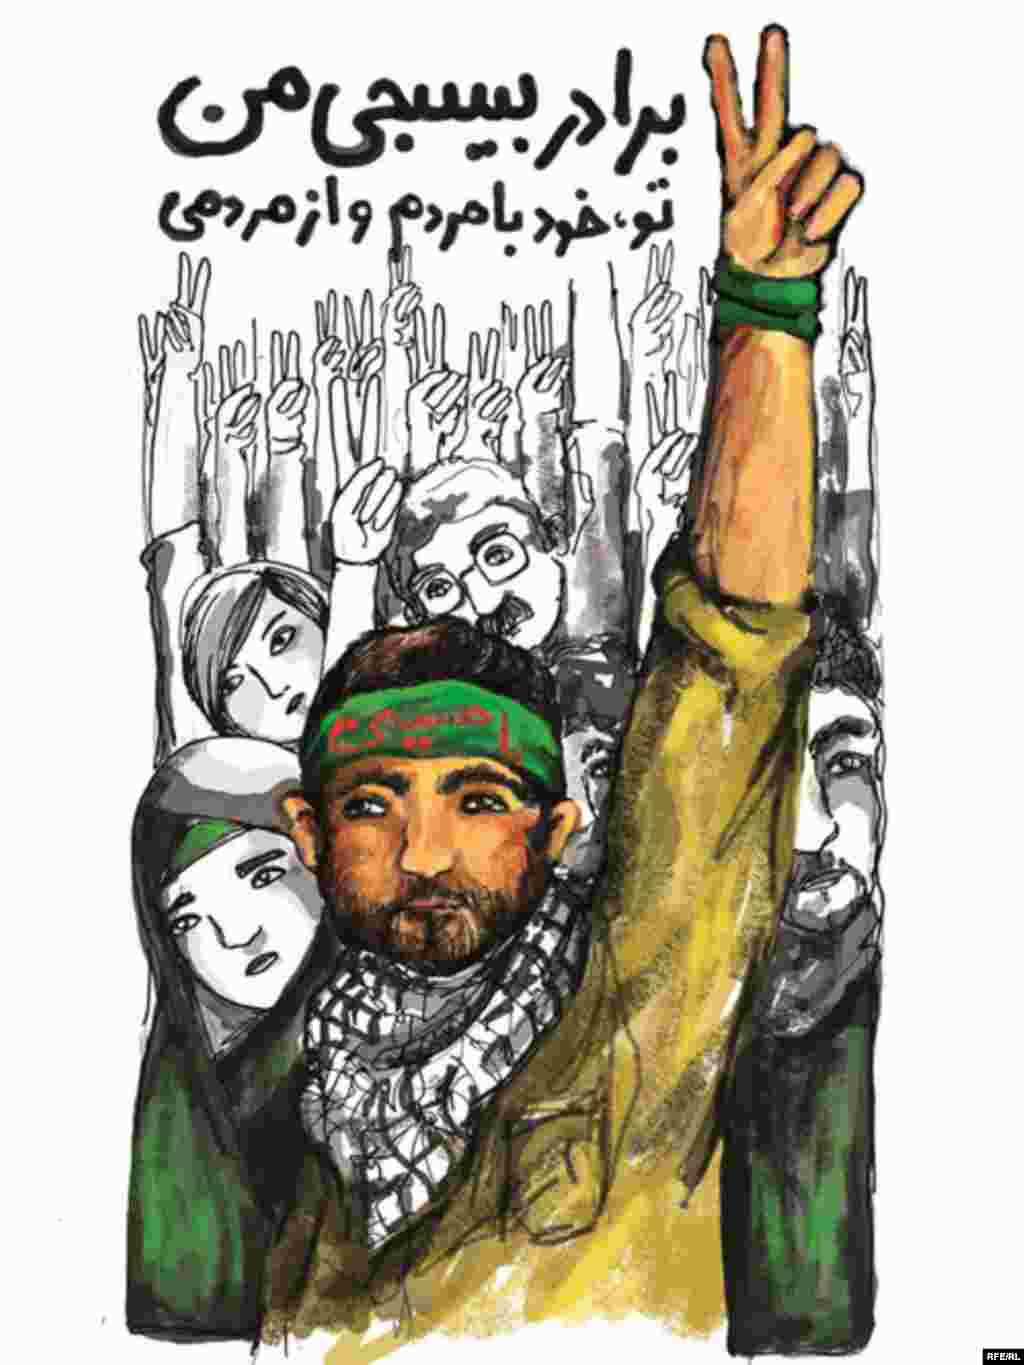 Iran's Election Unrest: An Artist's View #10